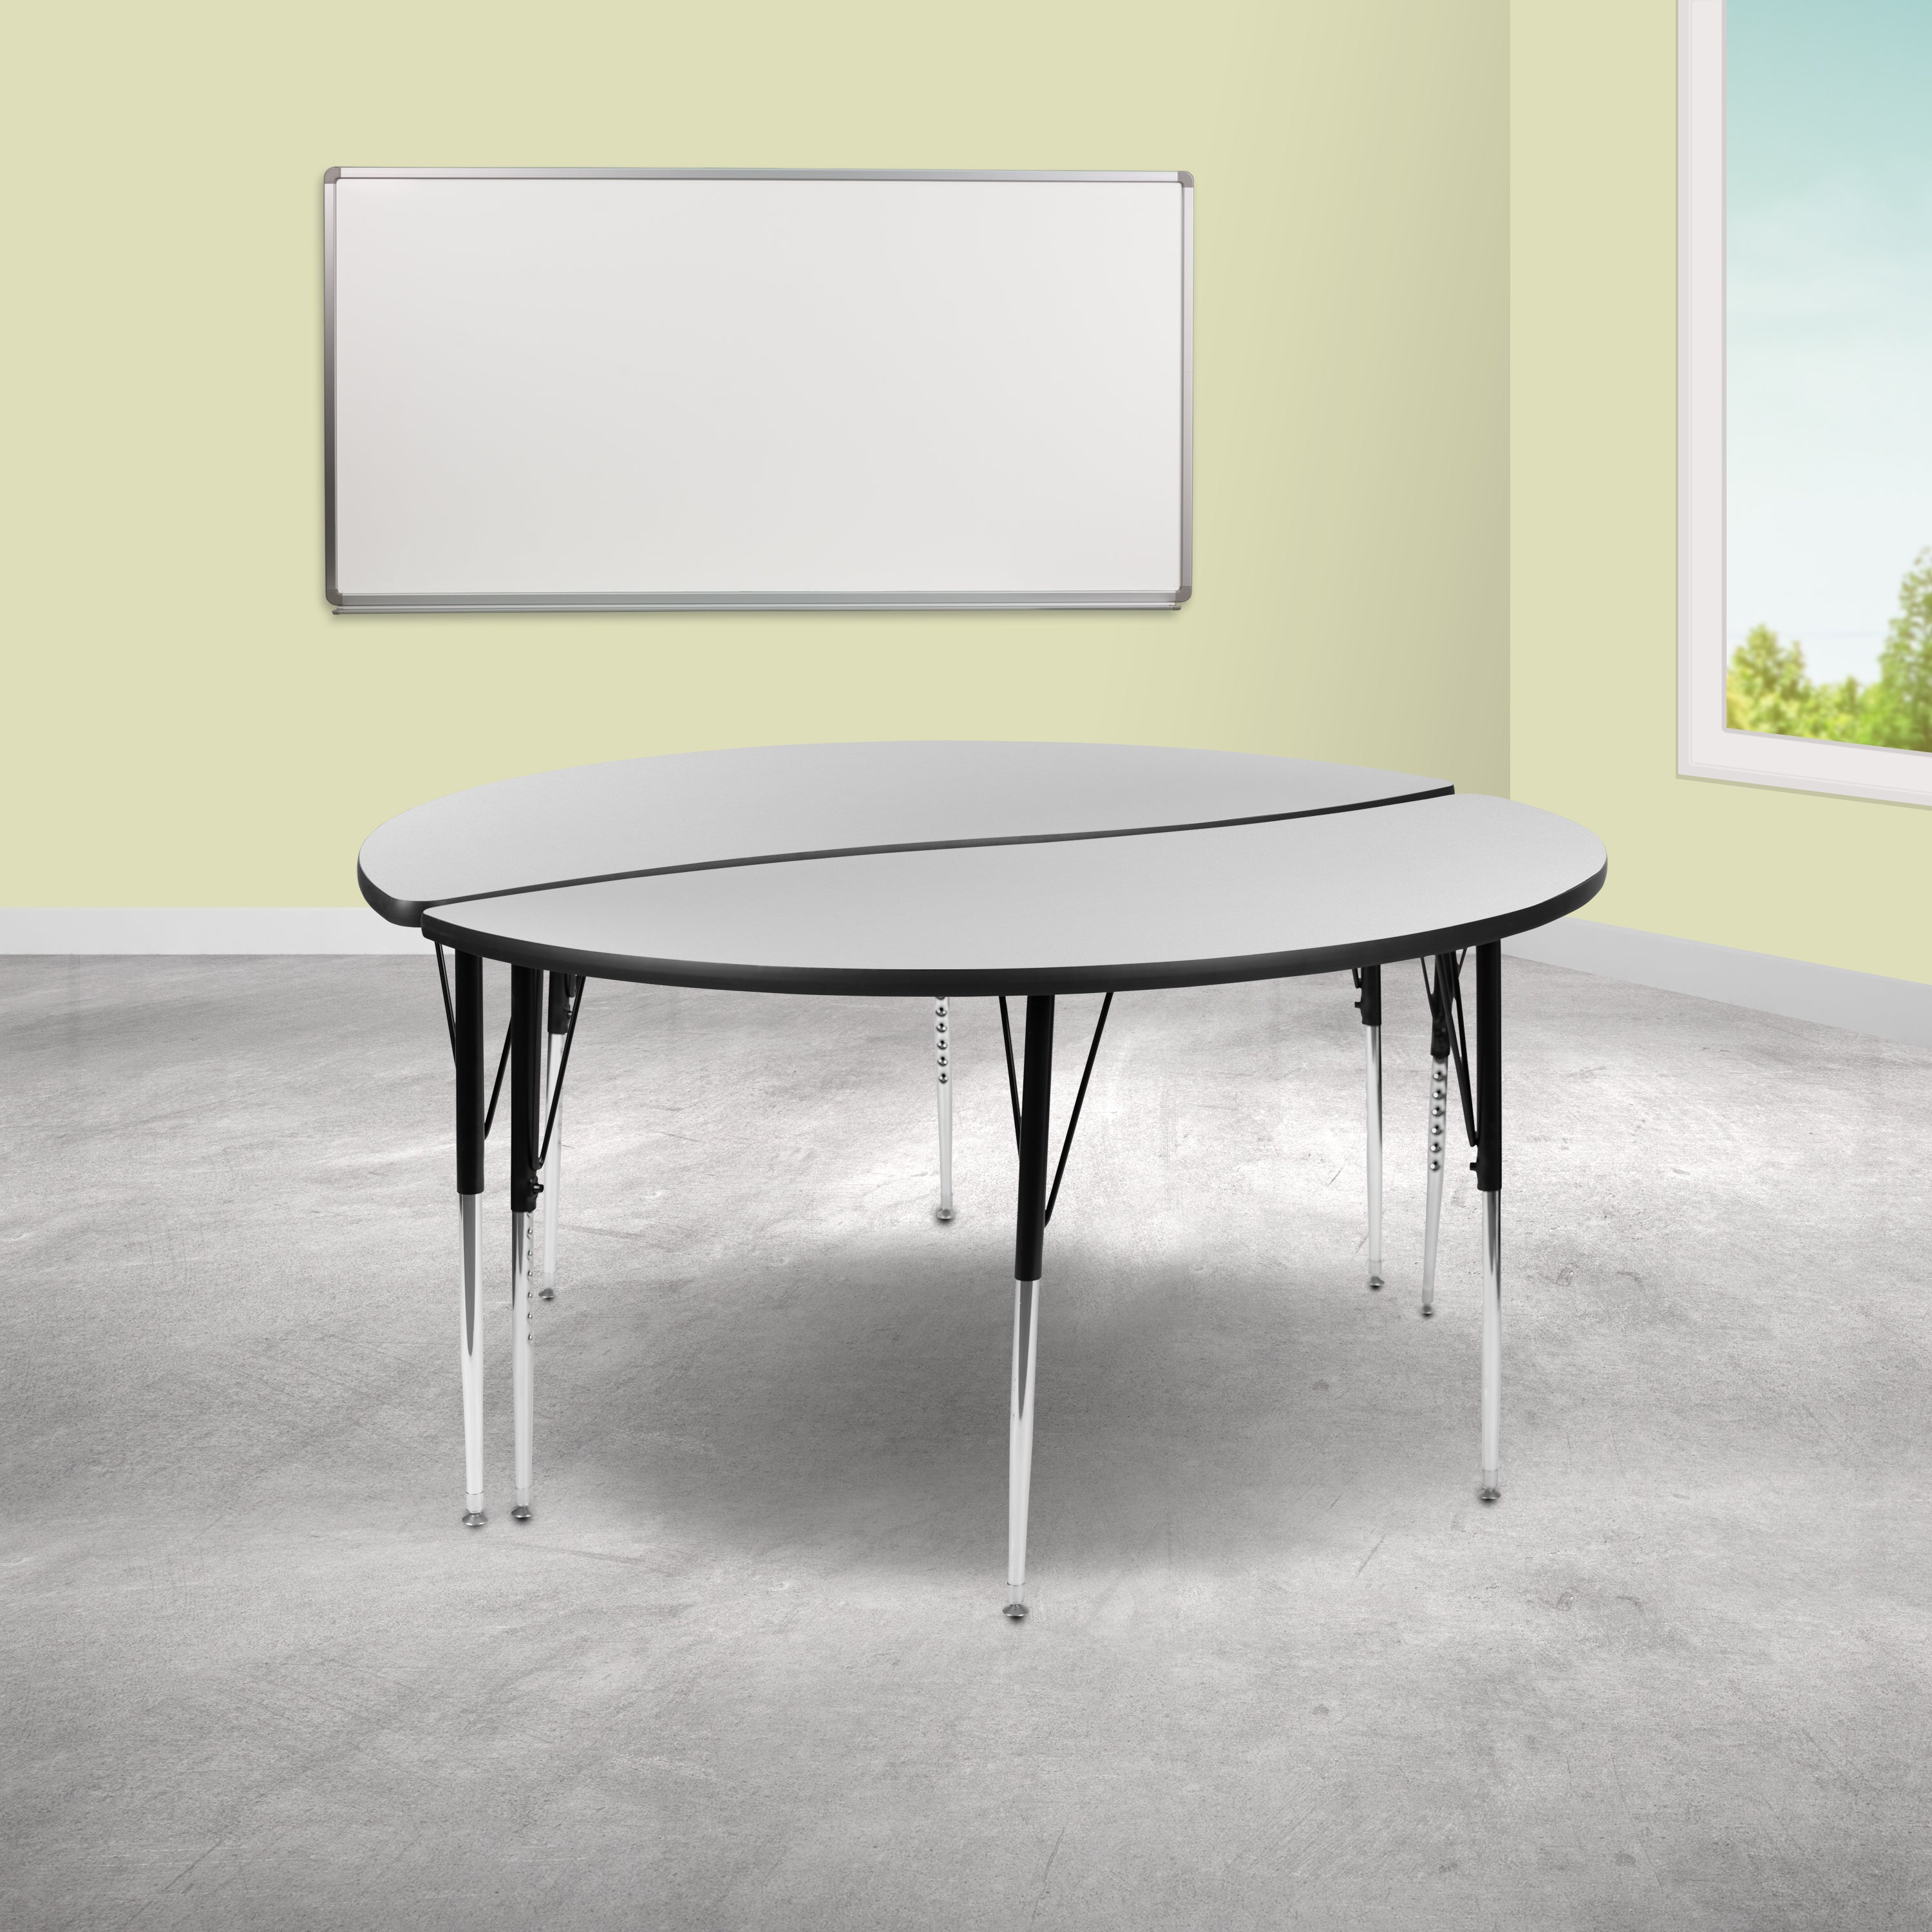 2 Piece 60" Circle Wave Flexible Grey Thermal Laminate Activity Table Set - Standard Height Adjustable Legs-Collaborative Activity Table Set-Flash Furniture-Wall2Wall Furnishings